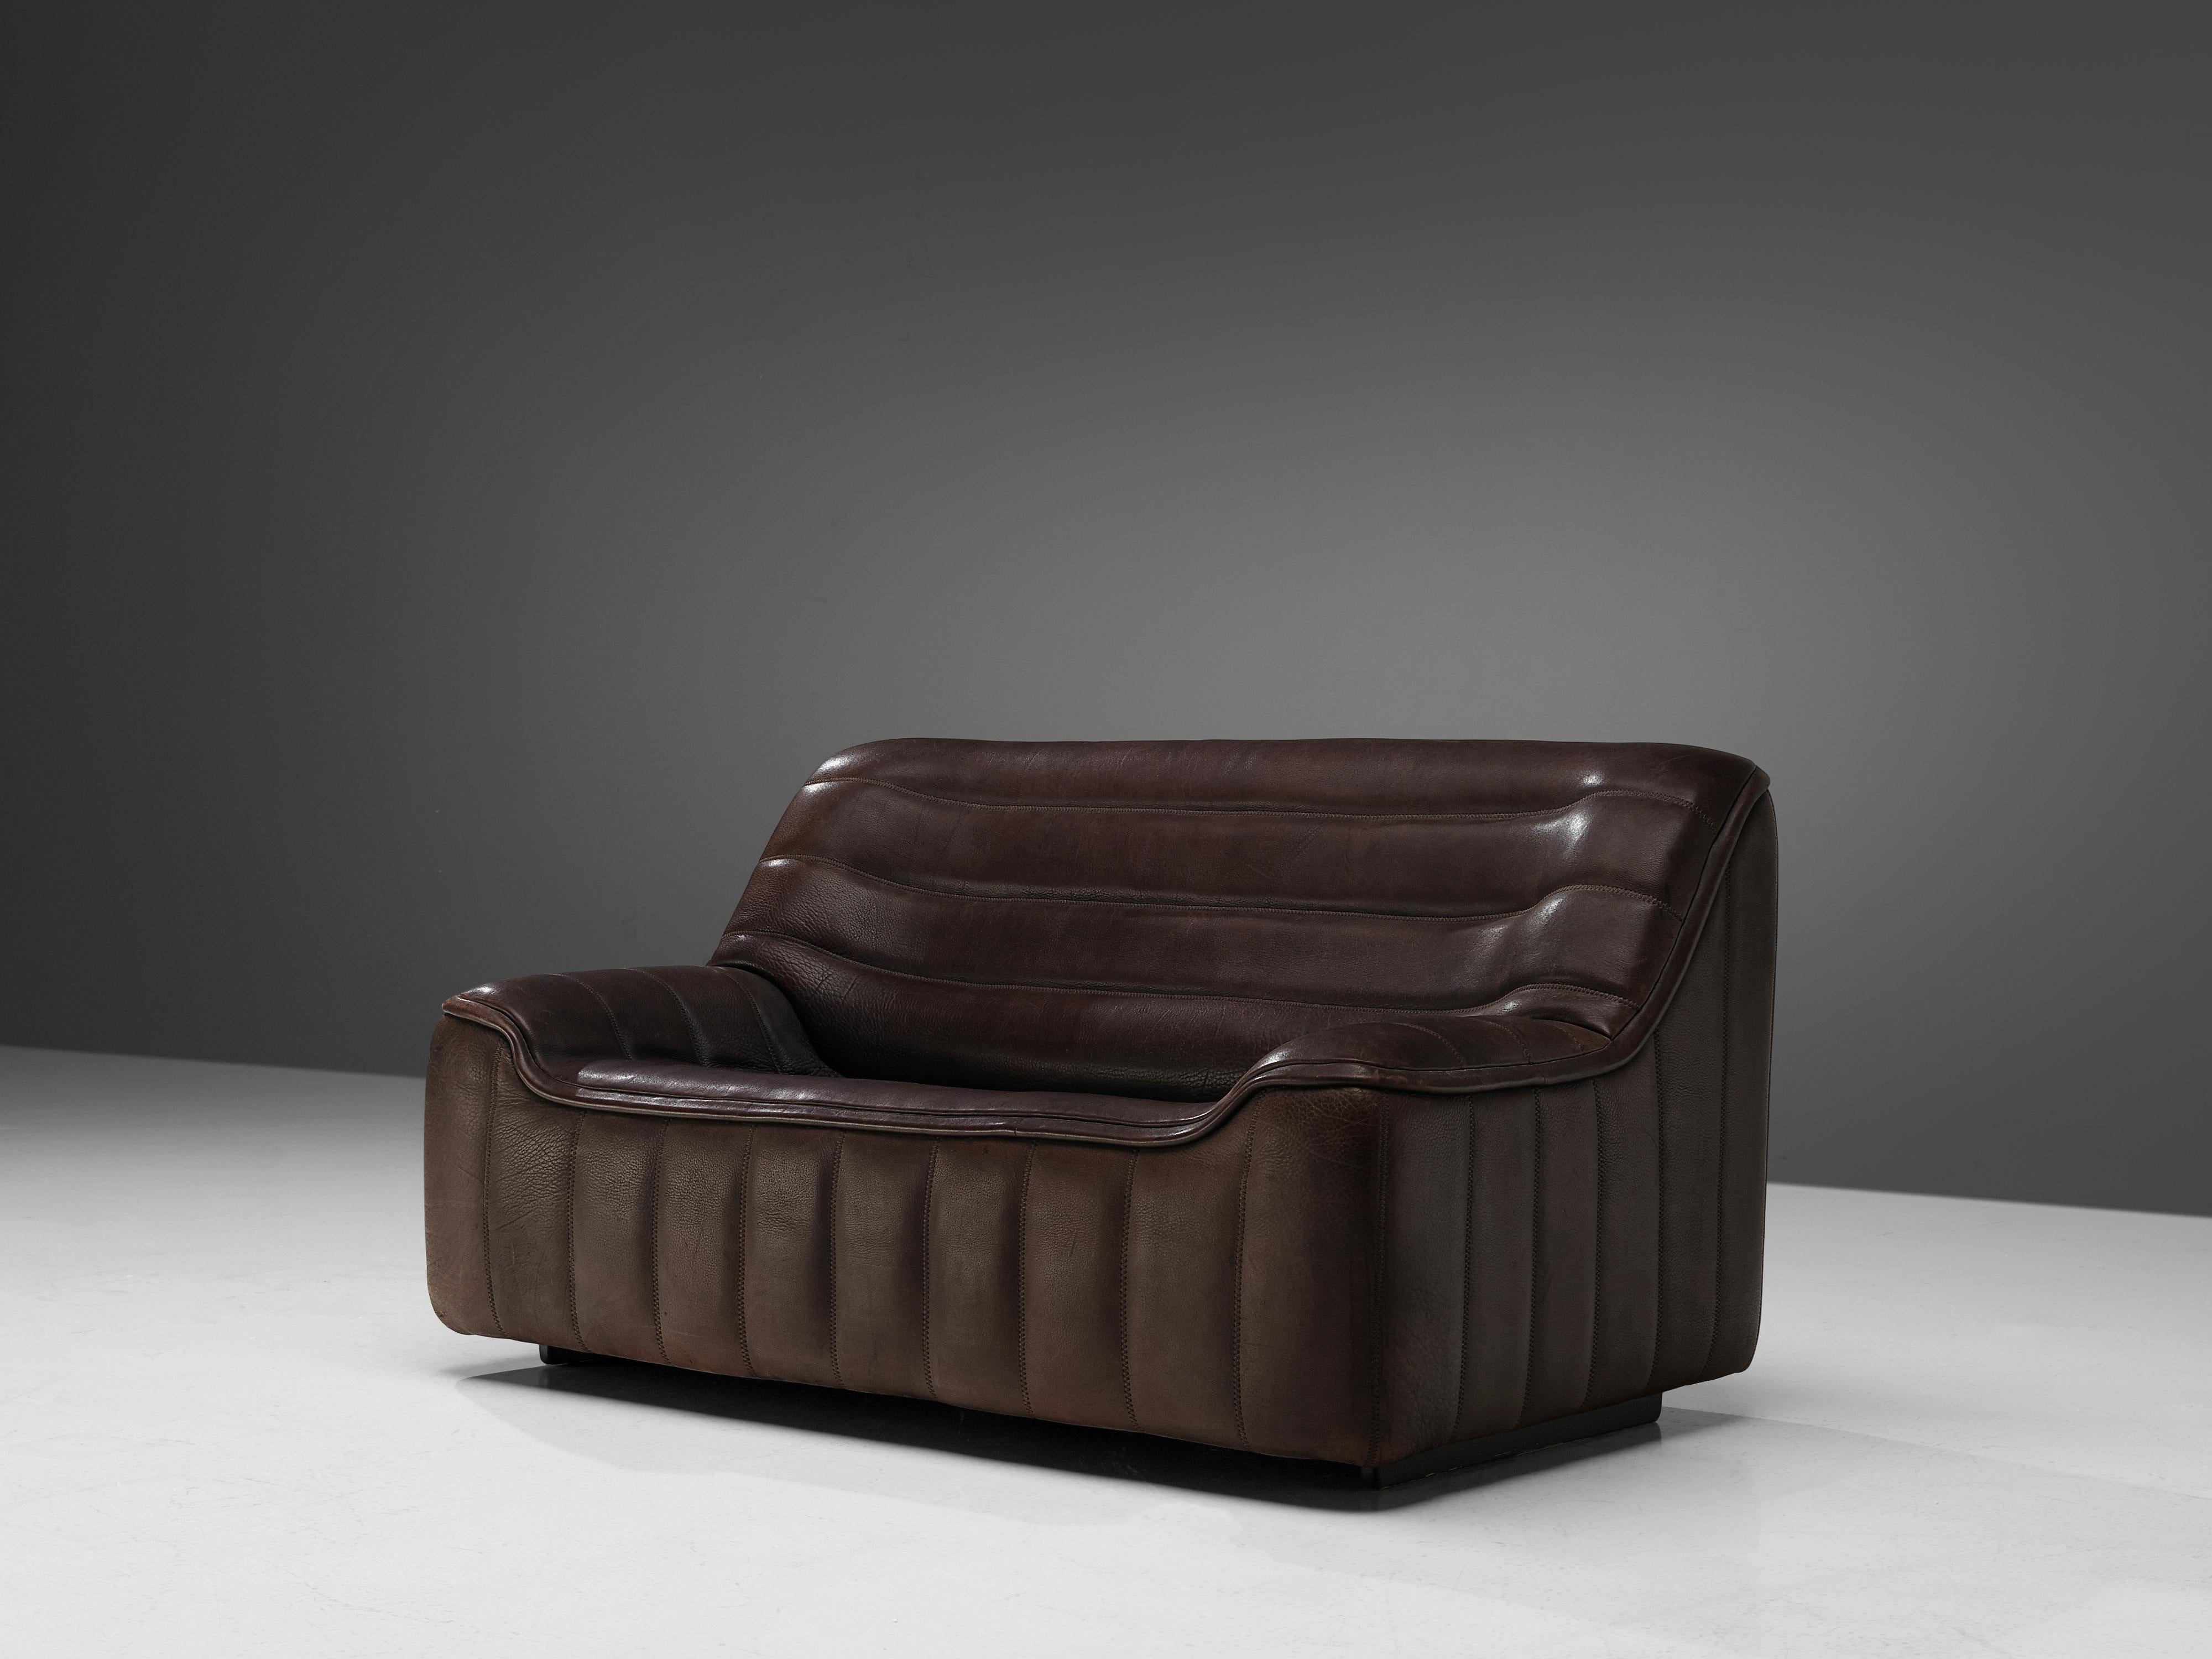 De Sede, 'DS84' sofa, leather, Switzerland, 1970s

Highly comfortable DS84 settee in dark brown leather by DeSede. The design is simplistic, yet very modern. This model features a solid base with a bulky seat and a high back. The armrests flow